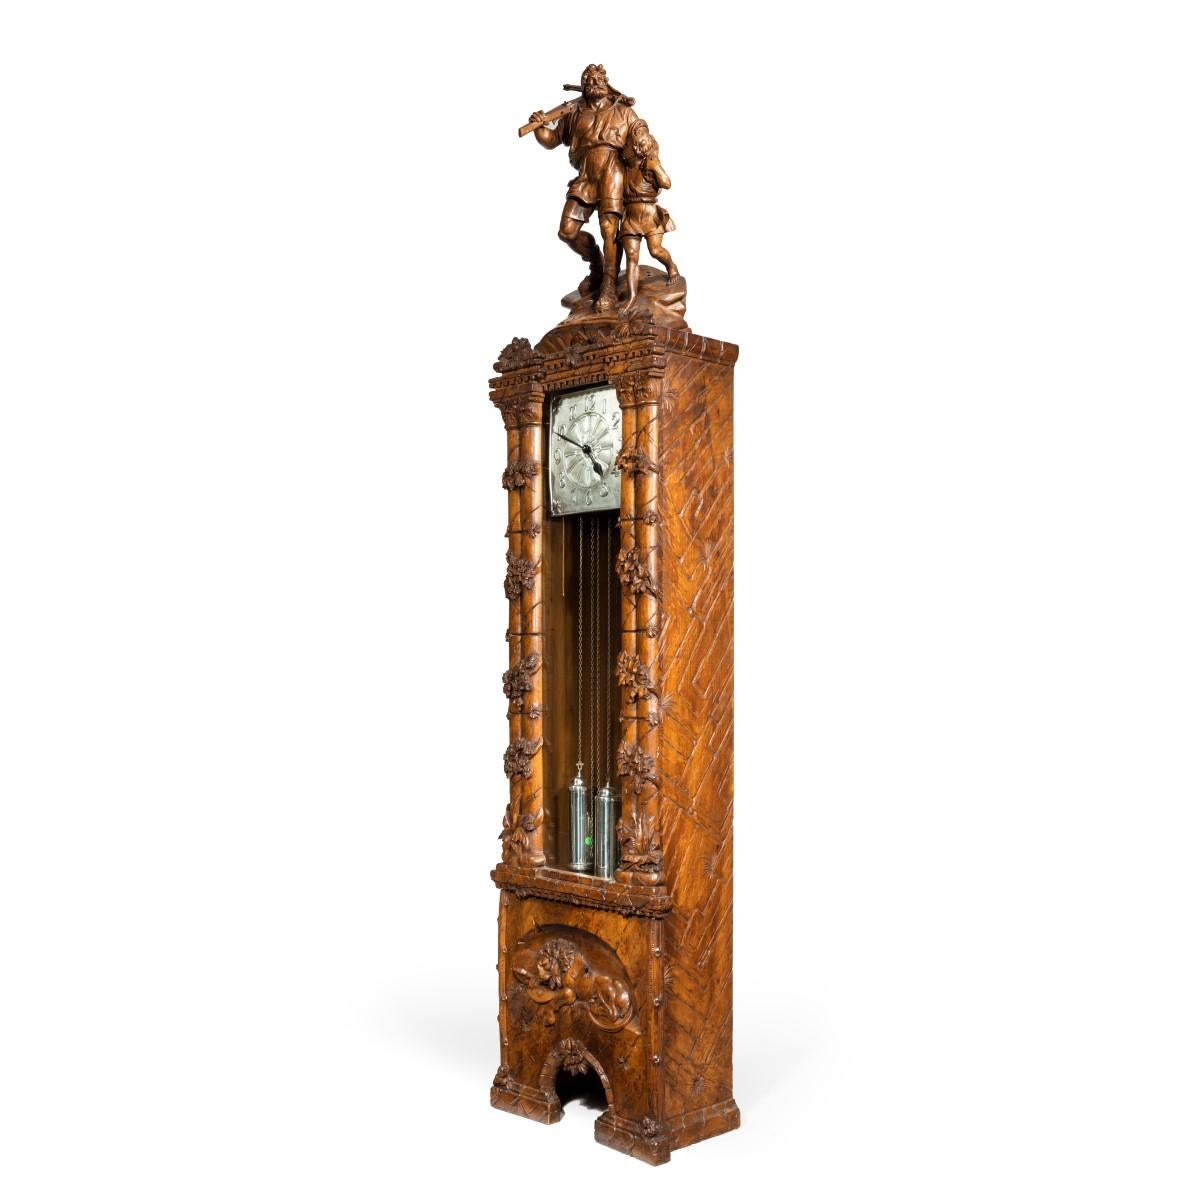 A ‘Black Forest’ linden wood long case clock by Spring of Interlaken, the square silvered dial enclosed behind a glazed door within an ornate case, surmounted by a carving of William Tell and his son after the “Tell Monument” by Richard Kissling